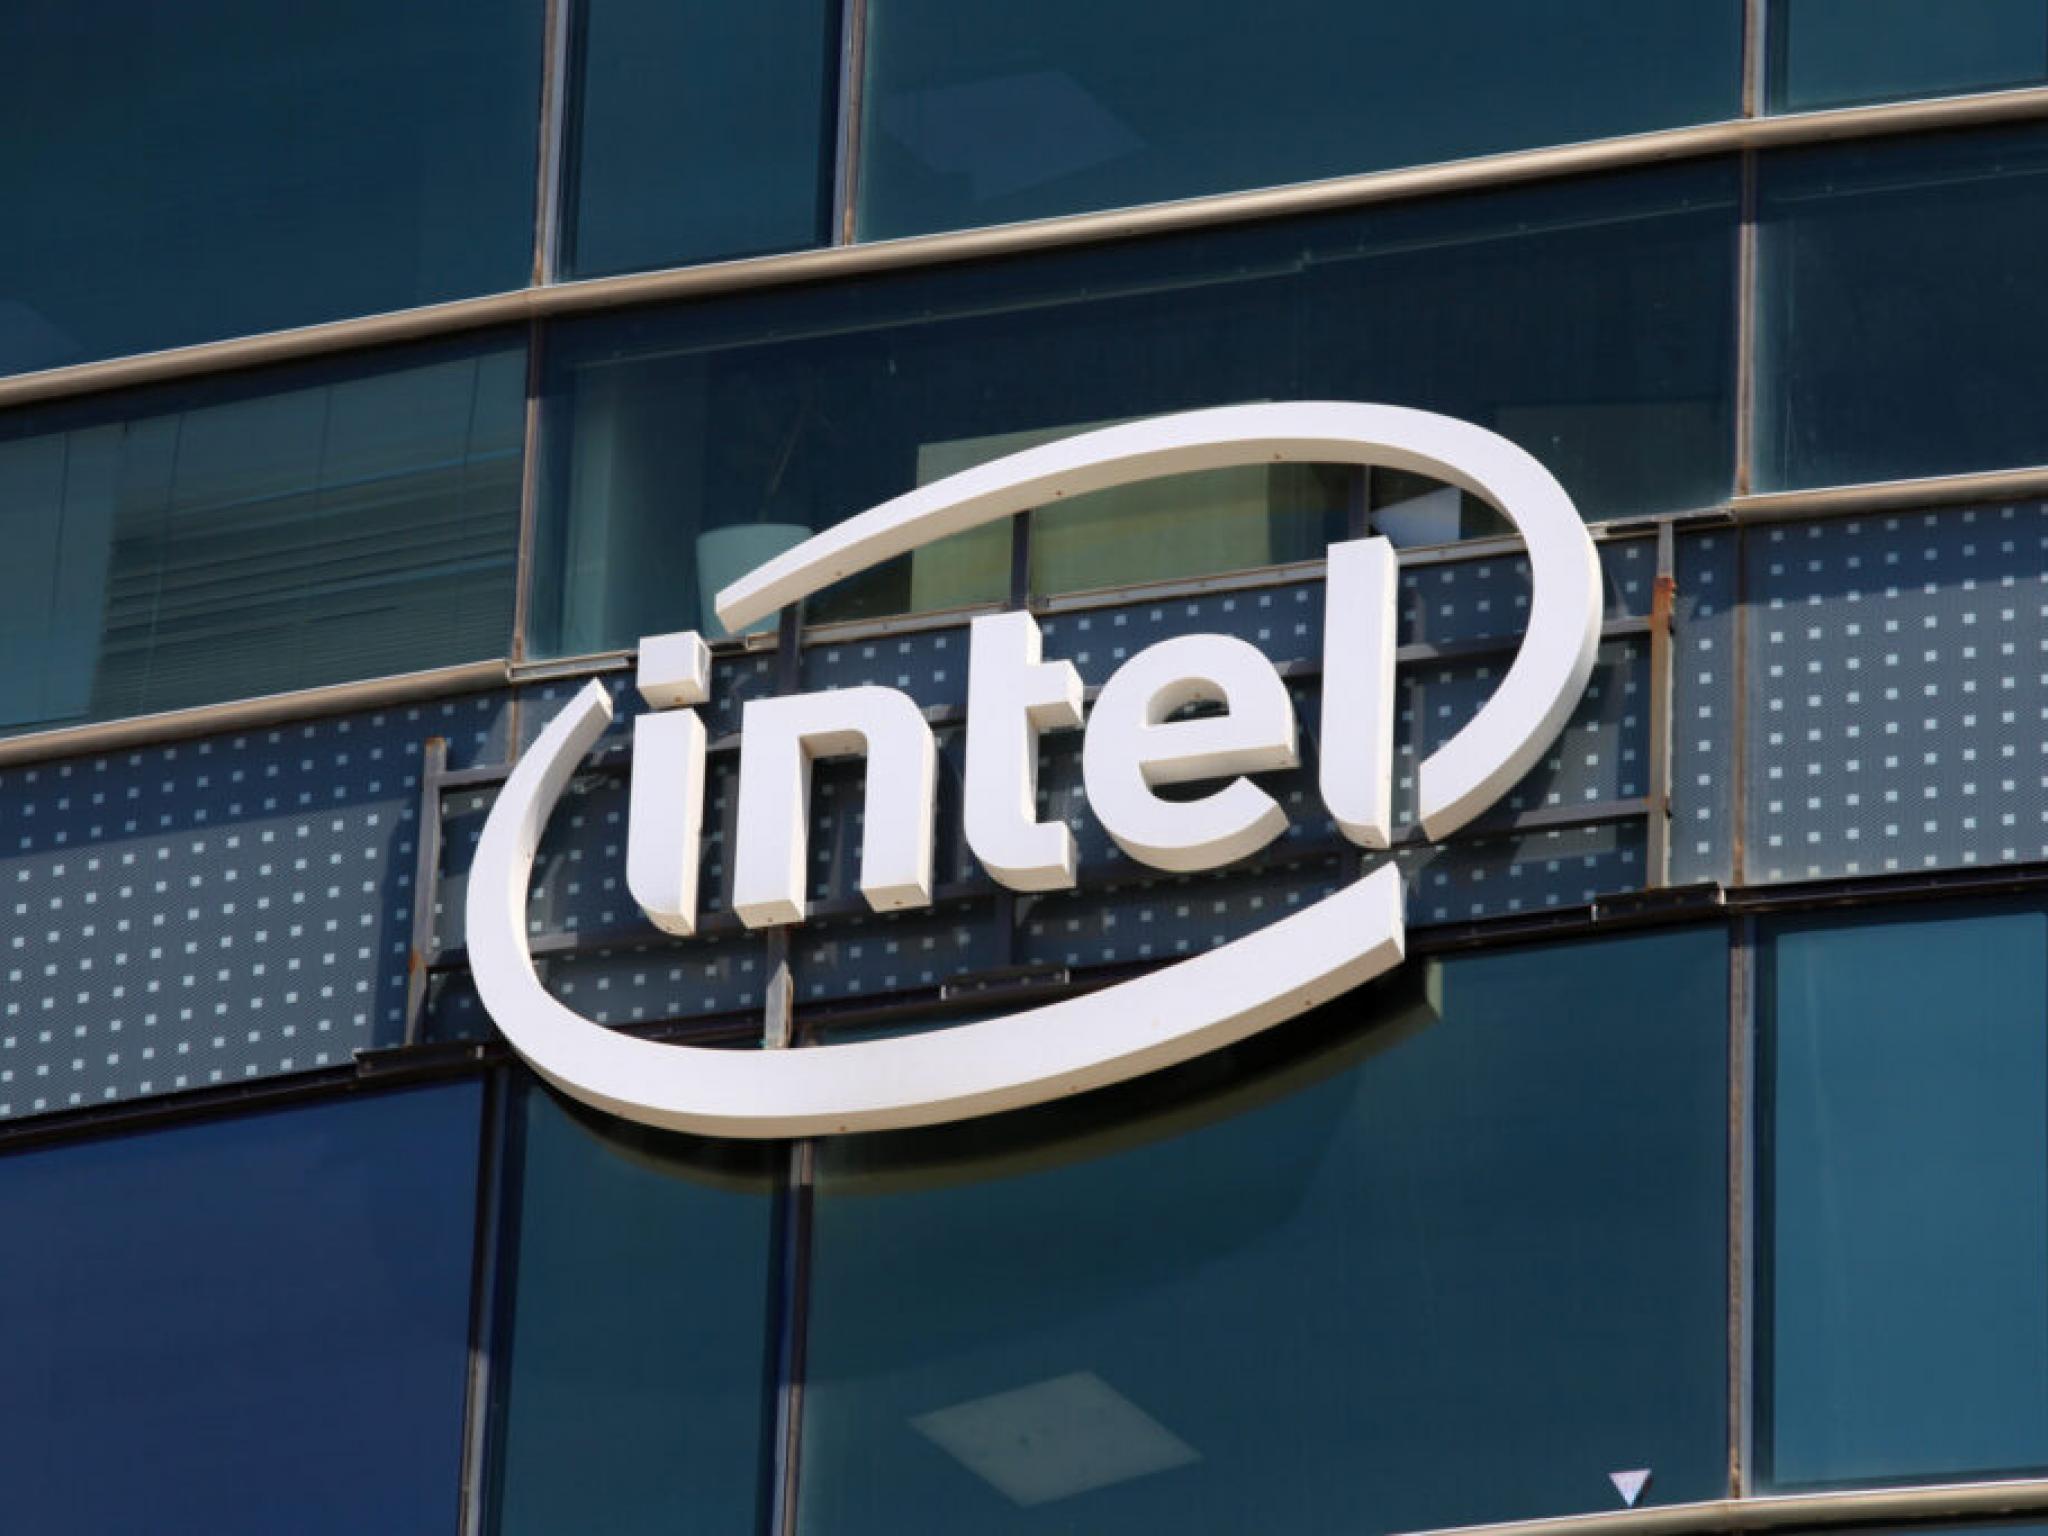  intel-ceo-pat-gelsinger-aims-to-regain-lost-ground-after-disappointing-results-the-road-map-is-healthy 